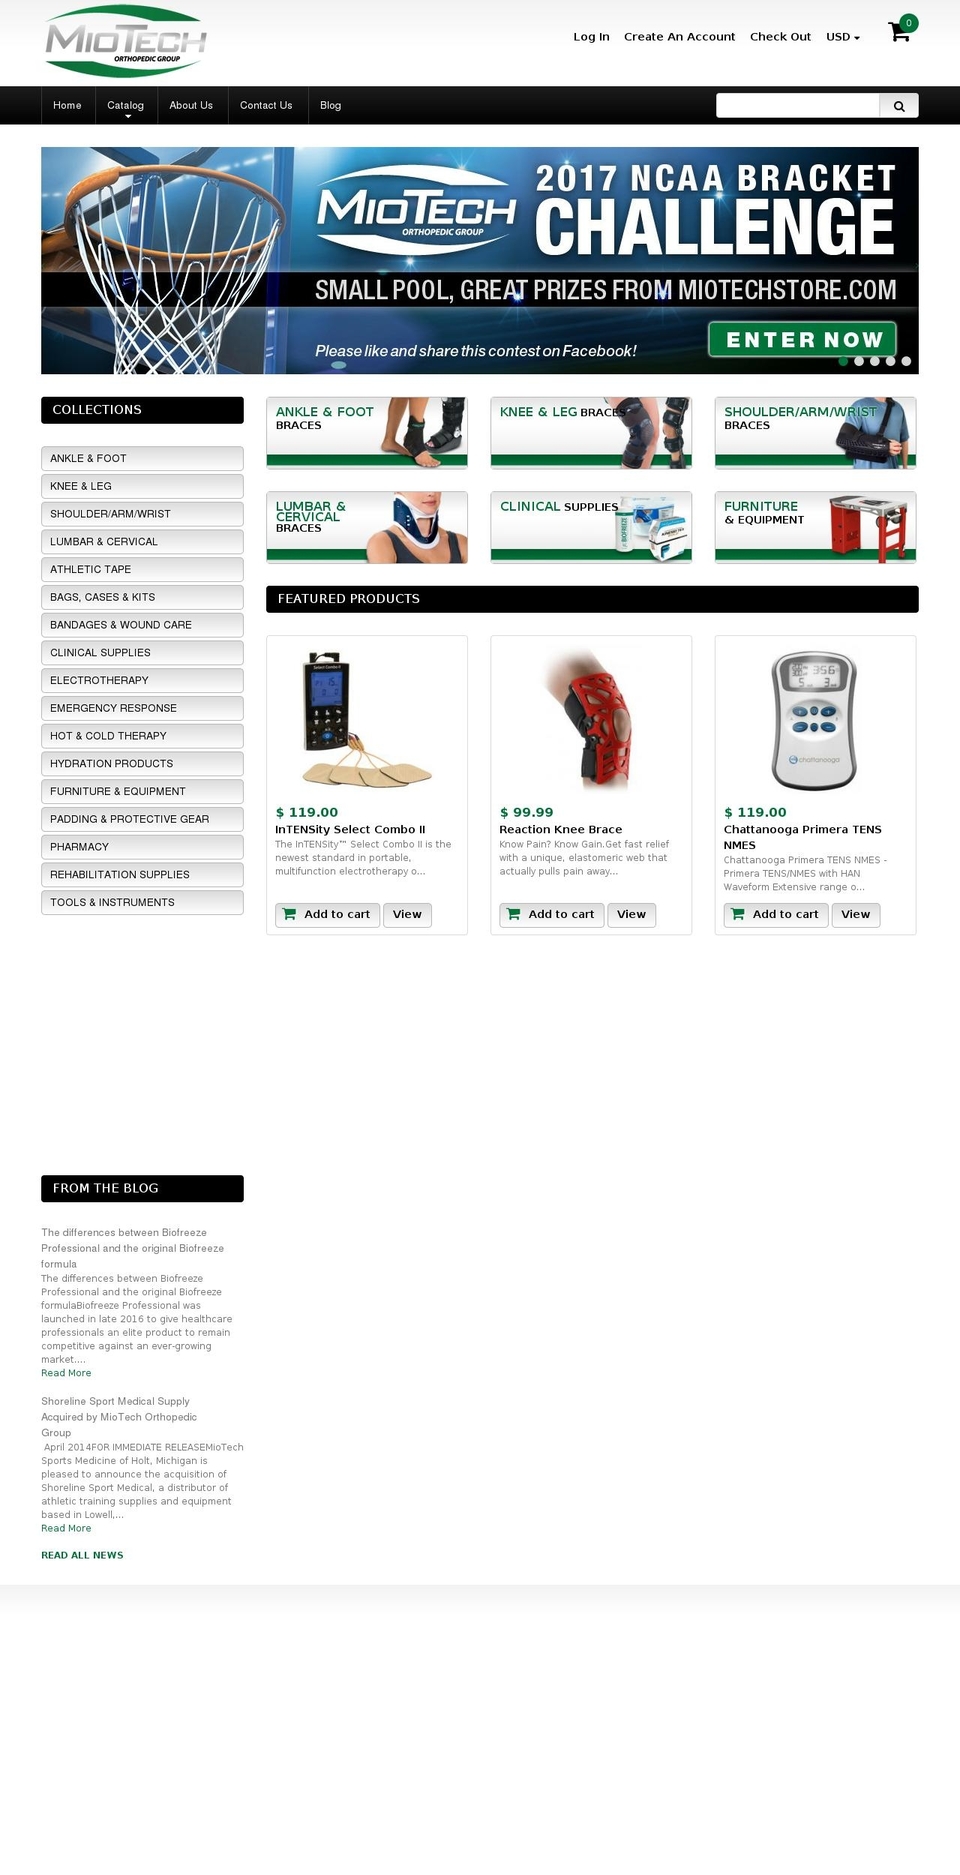 Wholesale Shopify theme site example miotechstore.com